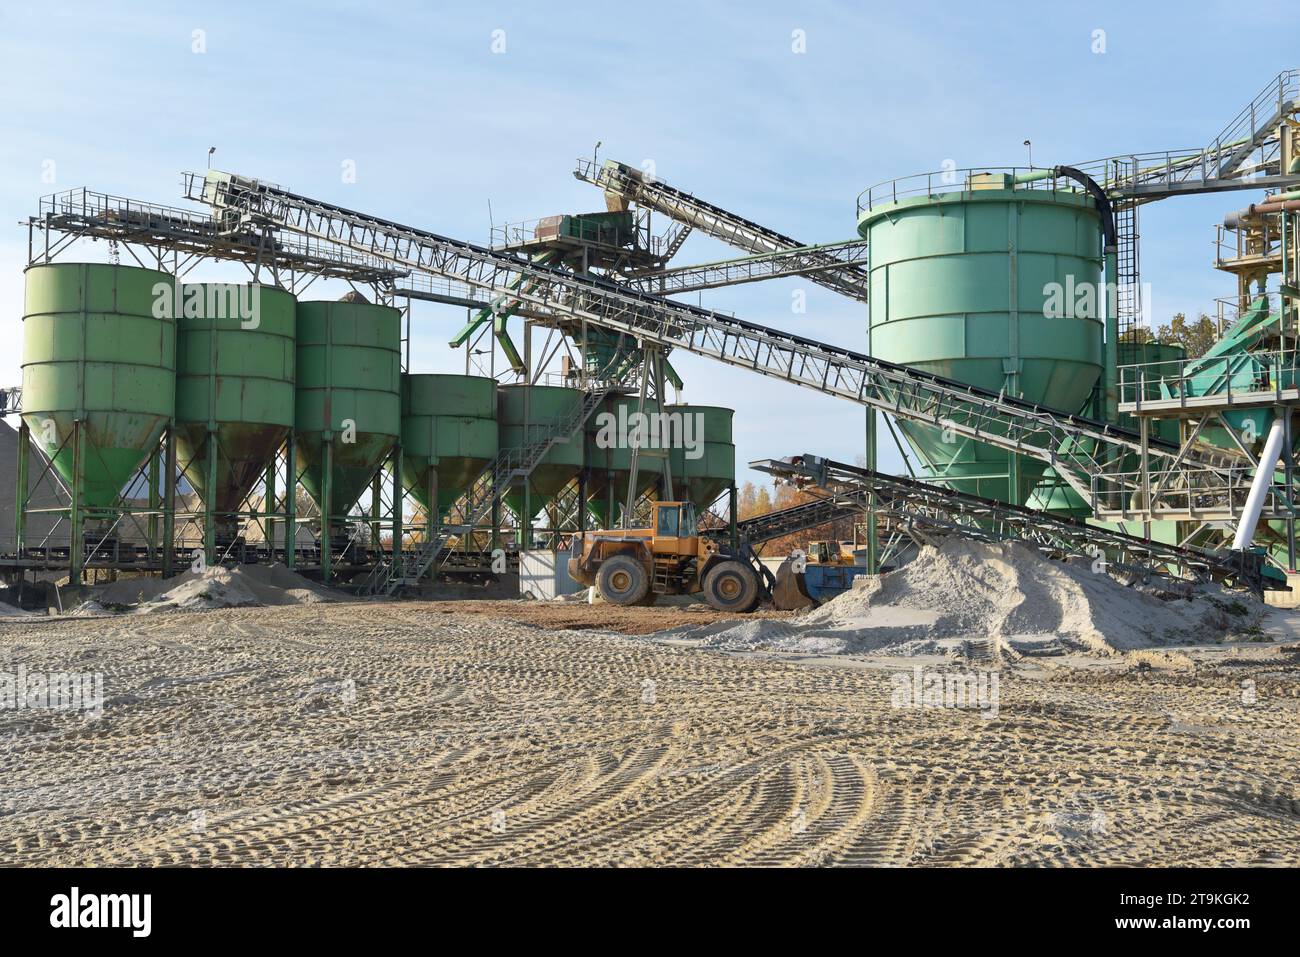 Industrial plant: gravel and sand pit for the extraction of building materials for the construction industry Stock Photo